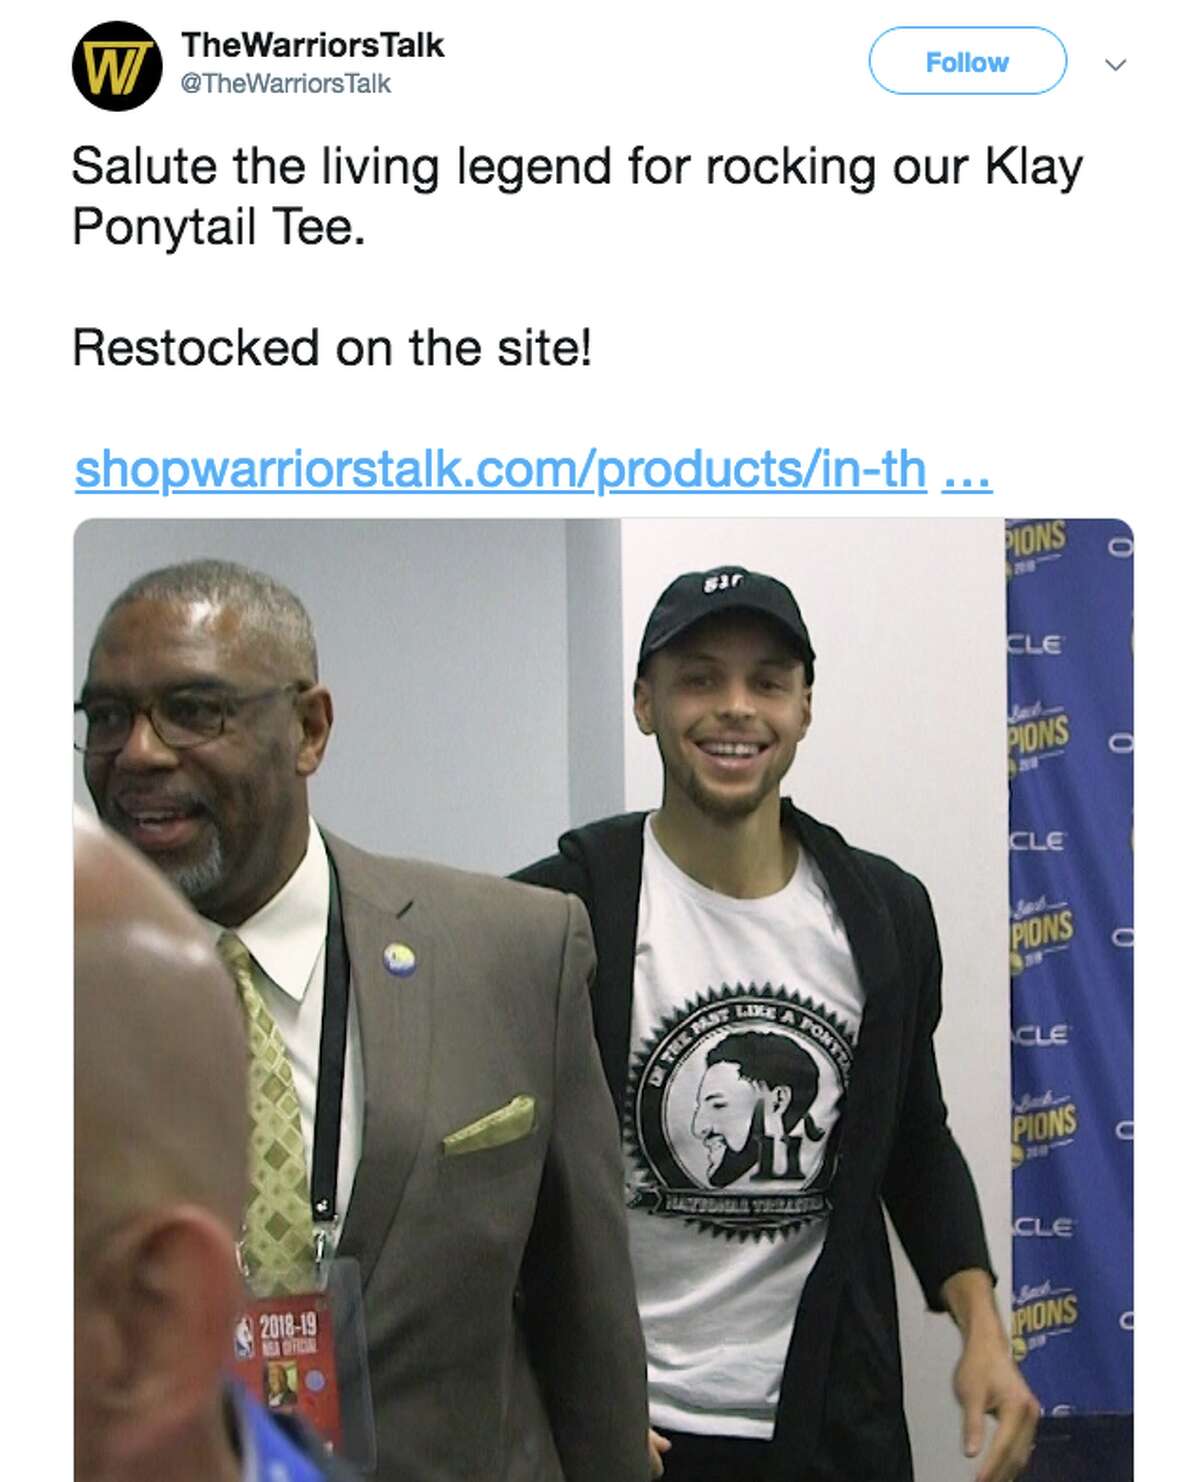 Stephen Curry sports a shirt with teammate Klay Thompson's face on it.